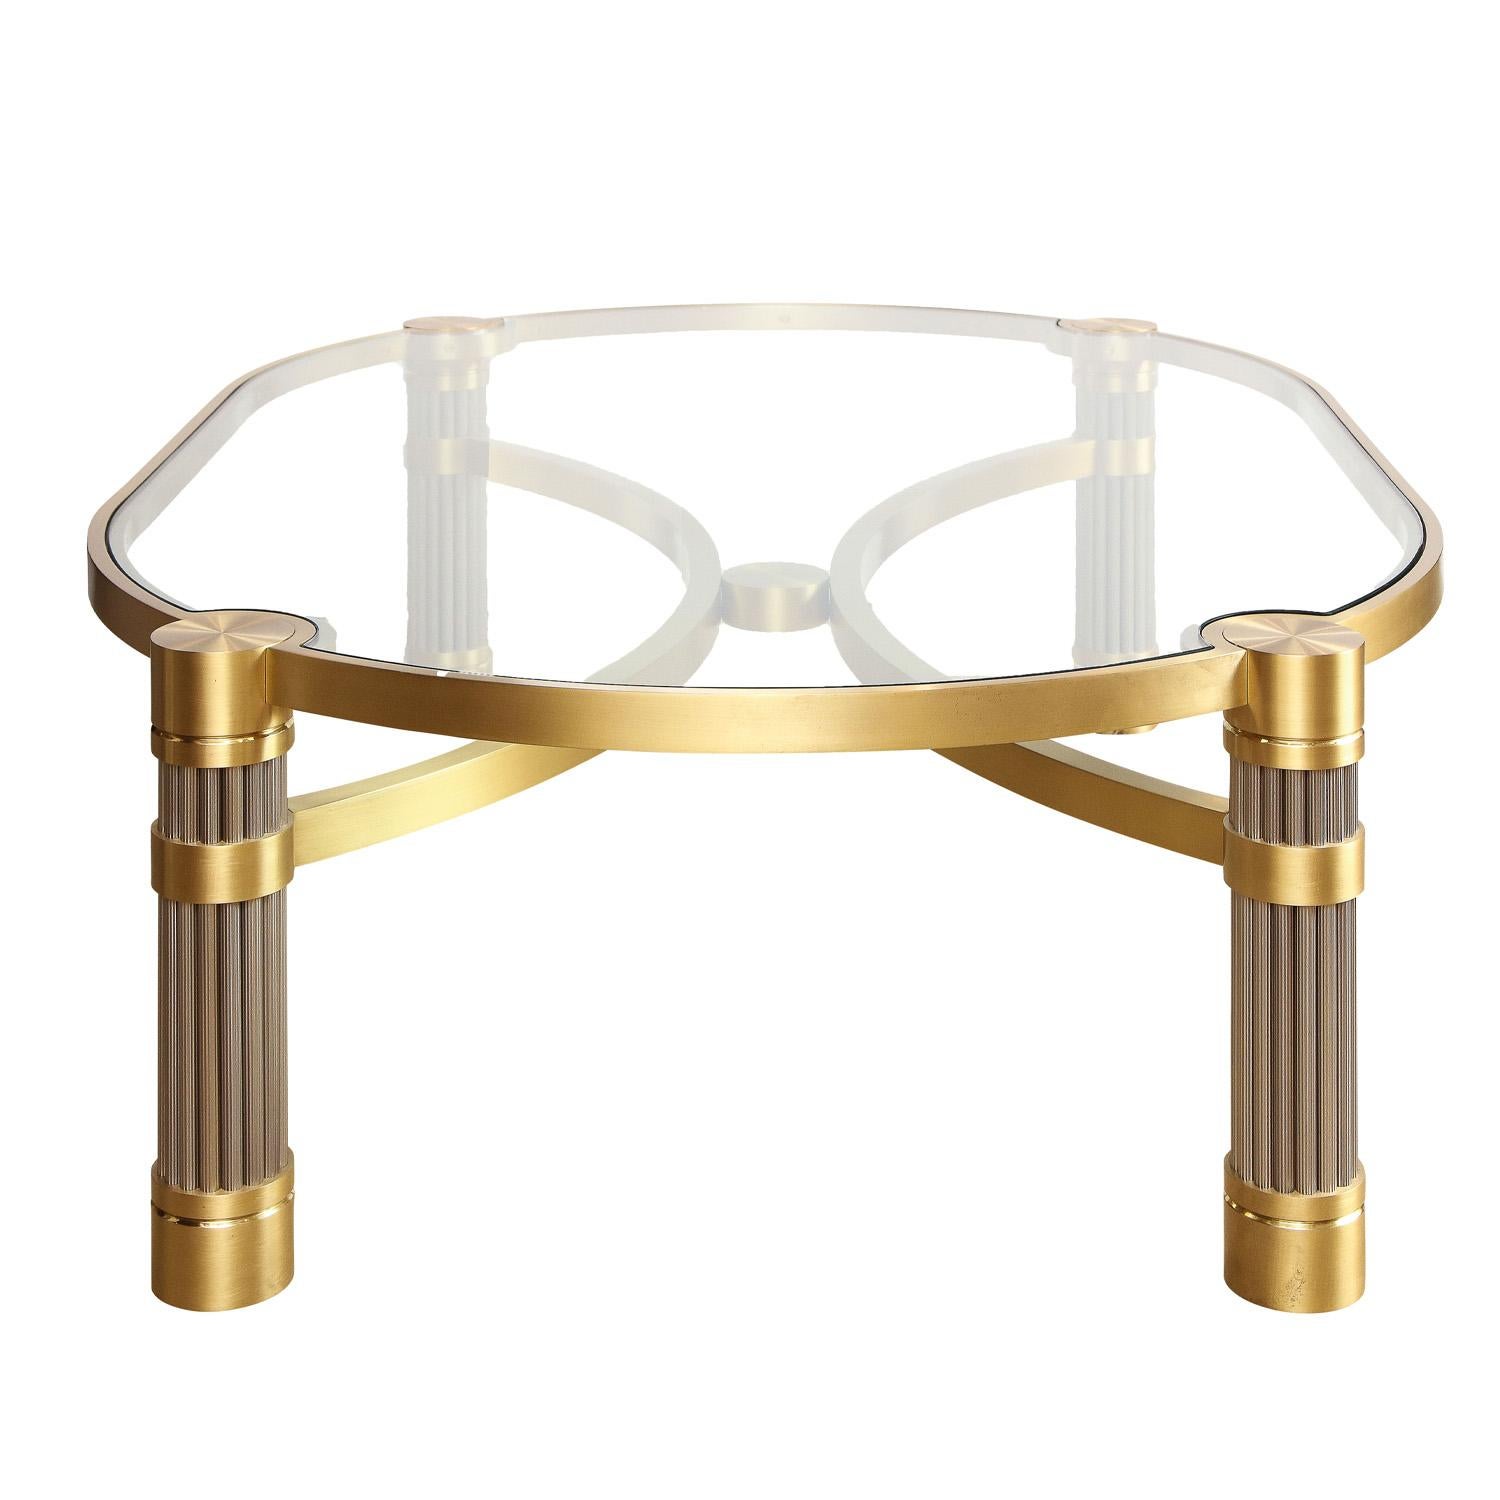 Mid-Century Modern Ron Seff Large Coffee Table in Brushed Stainless Steel and Brass, 1980s For Sale